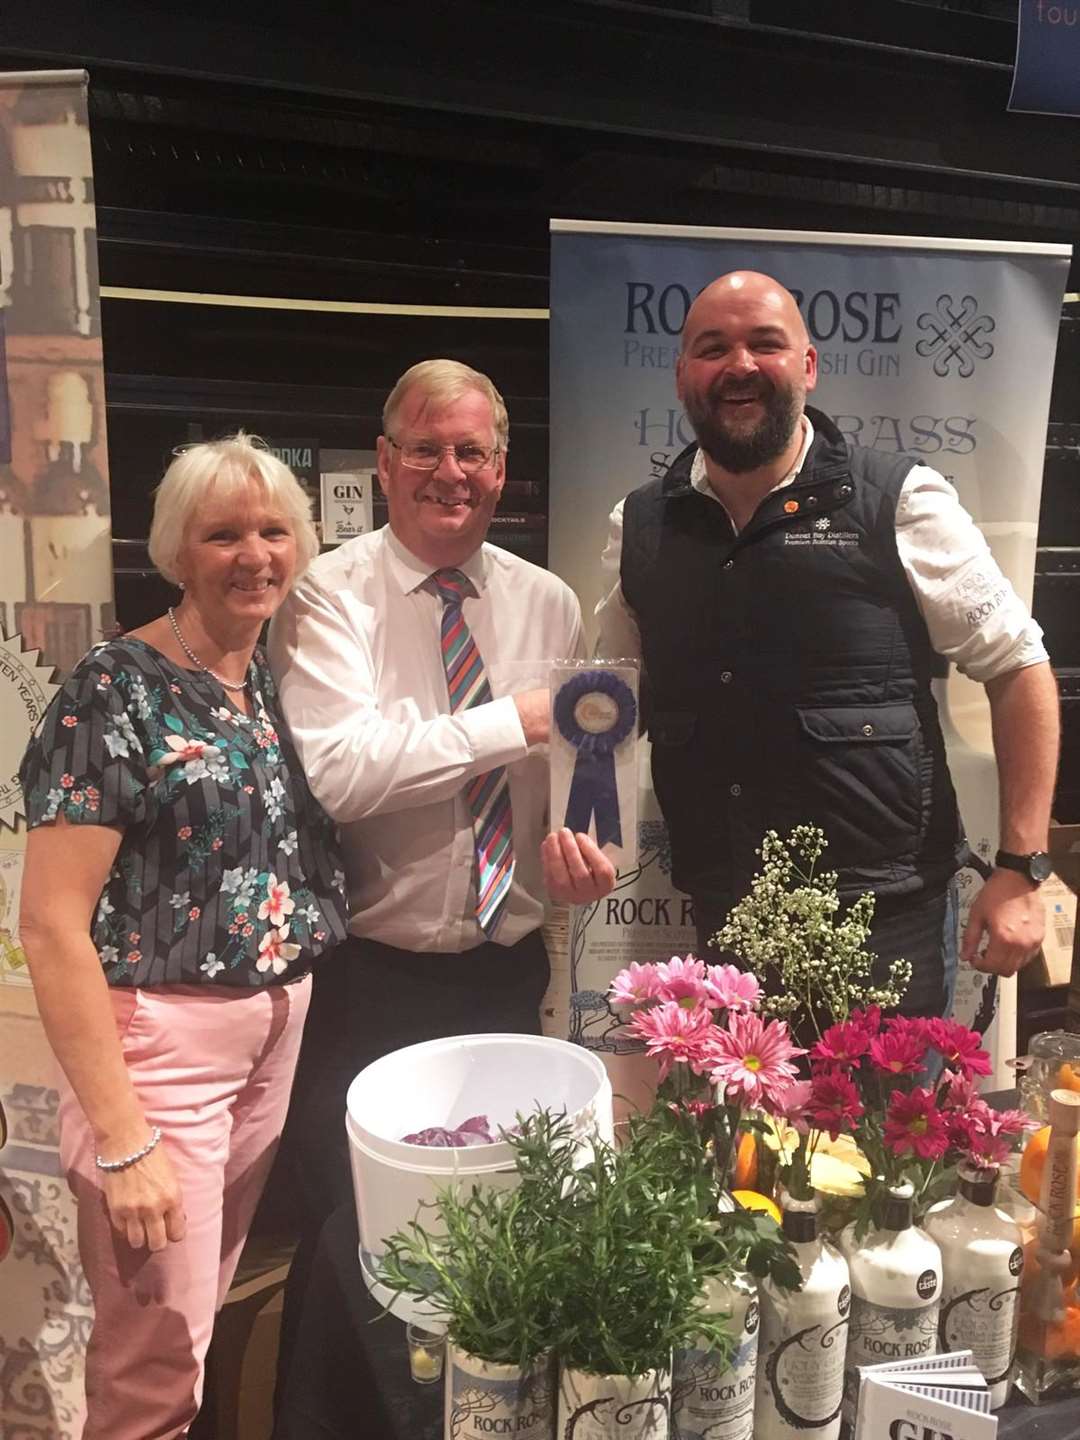 Sharon Davidson and David Dowling from the Cairngorm Group with Neil Stewart of Dunnet Bay Distillers at the Highland Food Drink Festival.